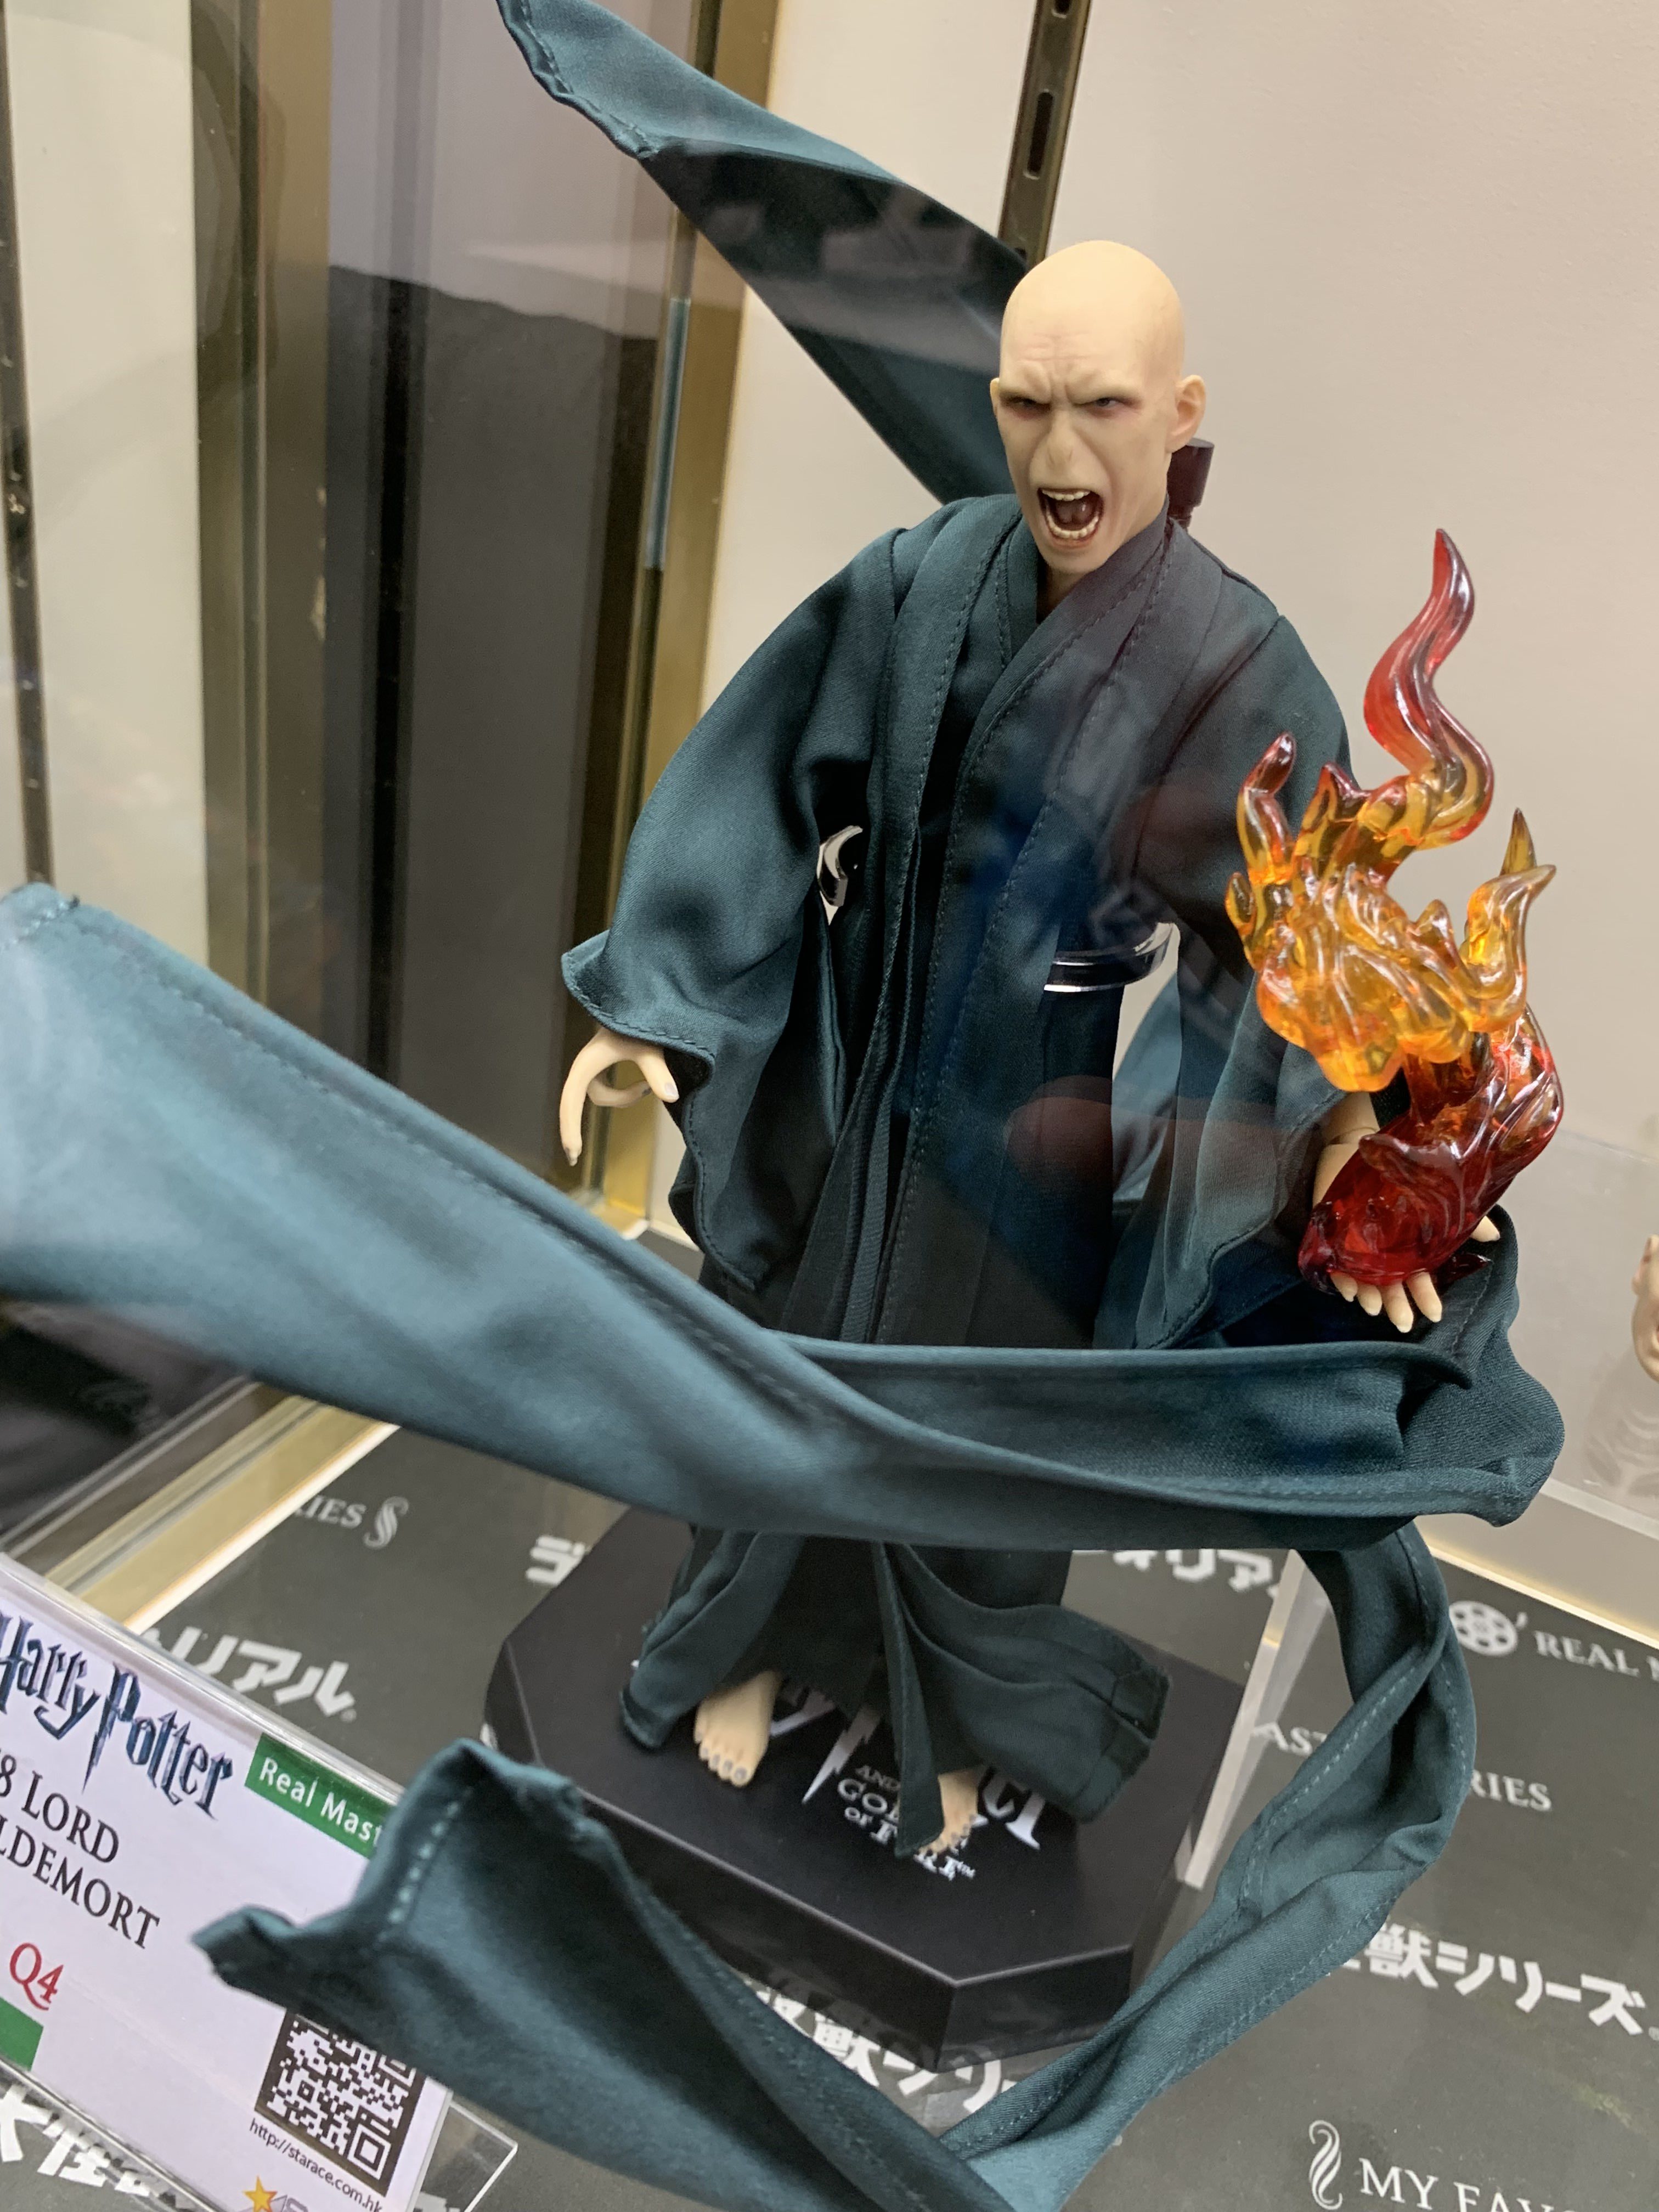 Star Ace Toys Limited’s Voldemort figurine is fired up.